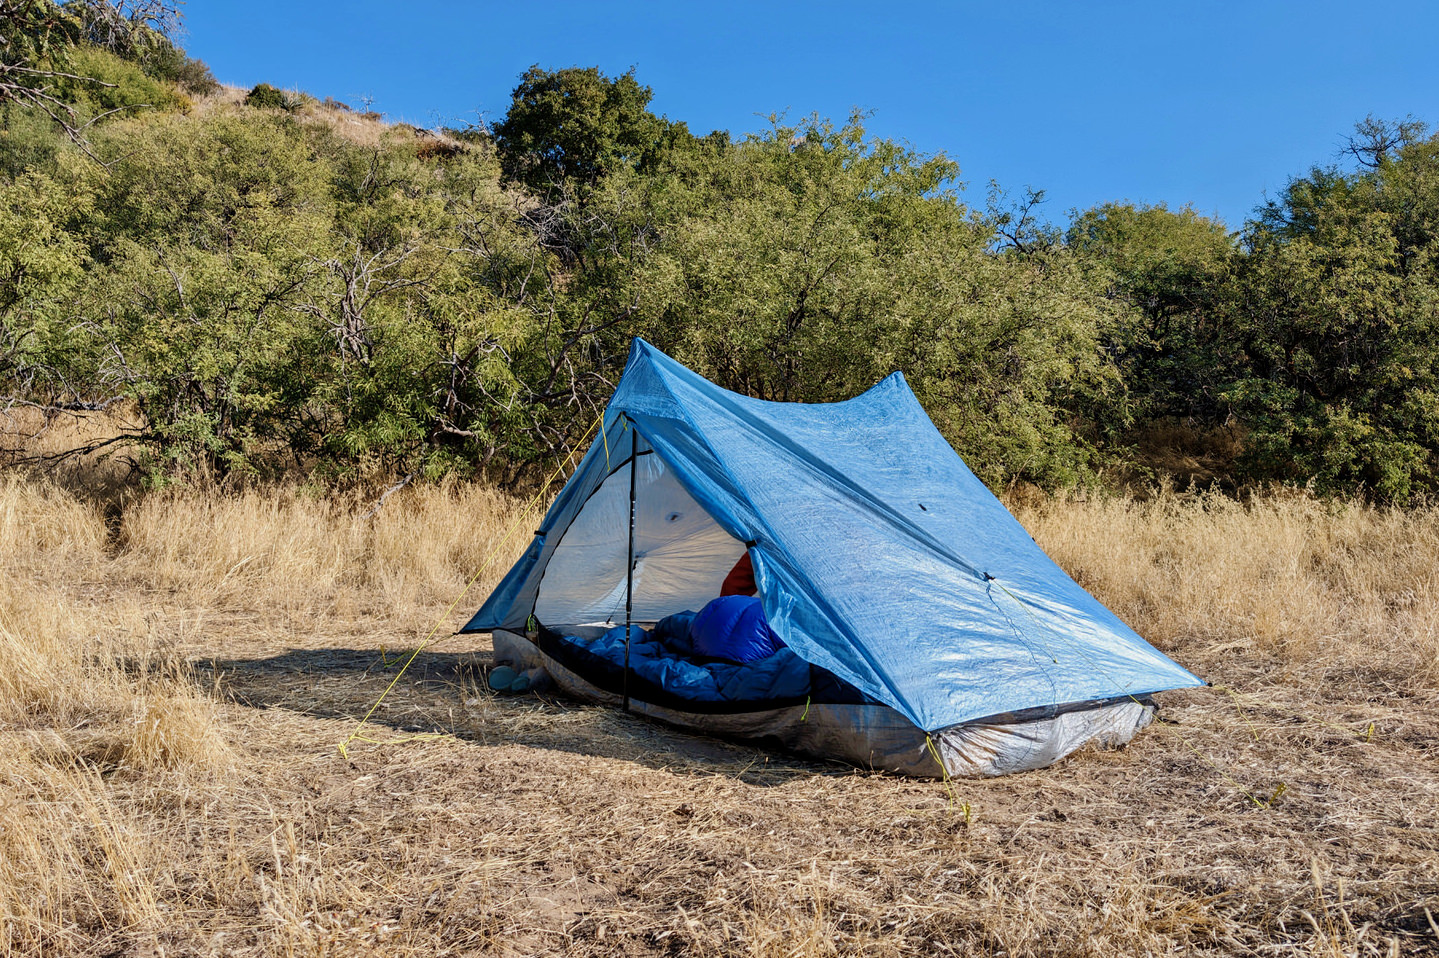 The Zpacks Duplex Tent set up in the sun with desert trees in the background